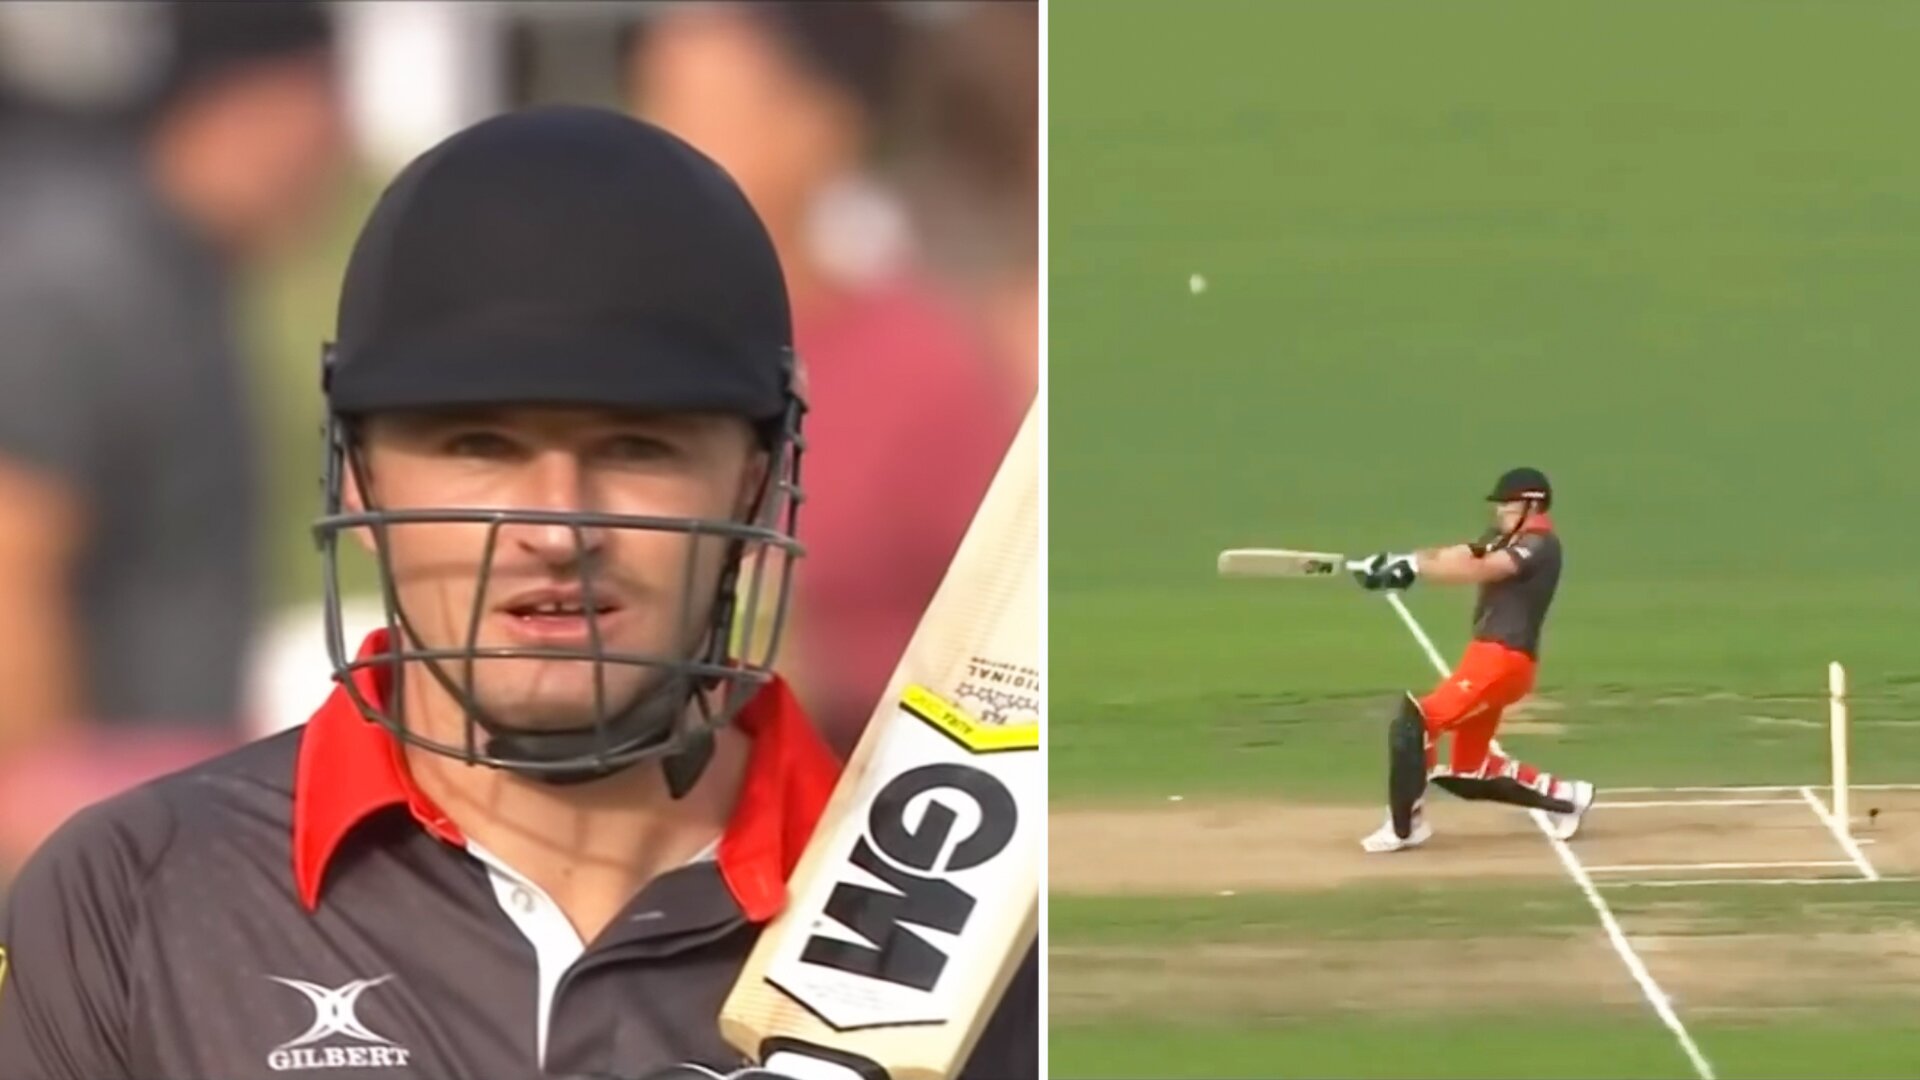 No one knew what to expect when Beauden Barrett played cricket on live television